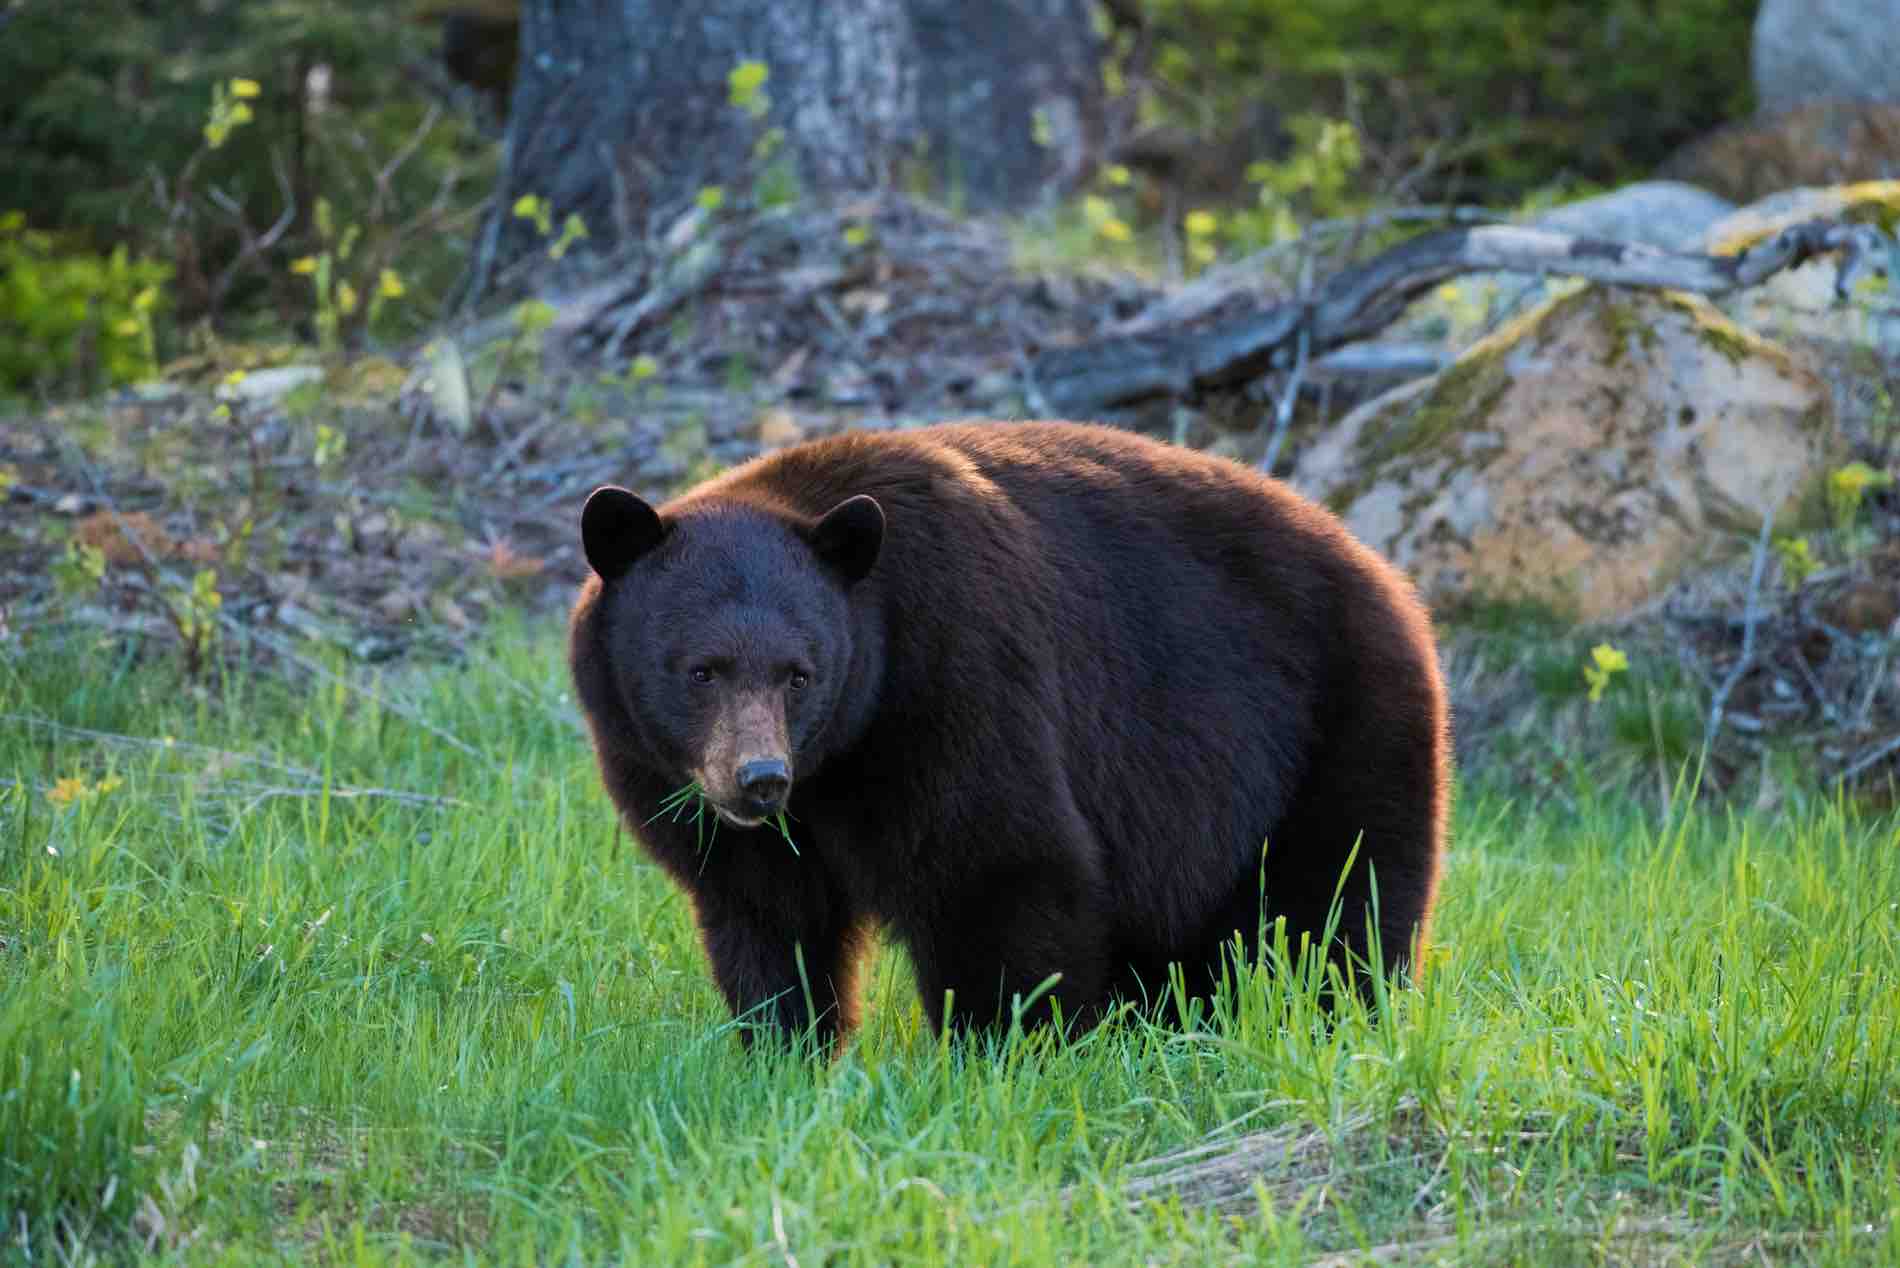 A black bear stands in a grassy field, there are blades of grass in its mouth.